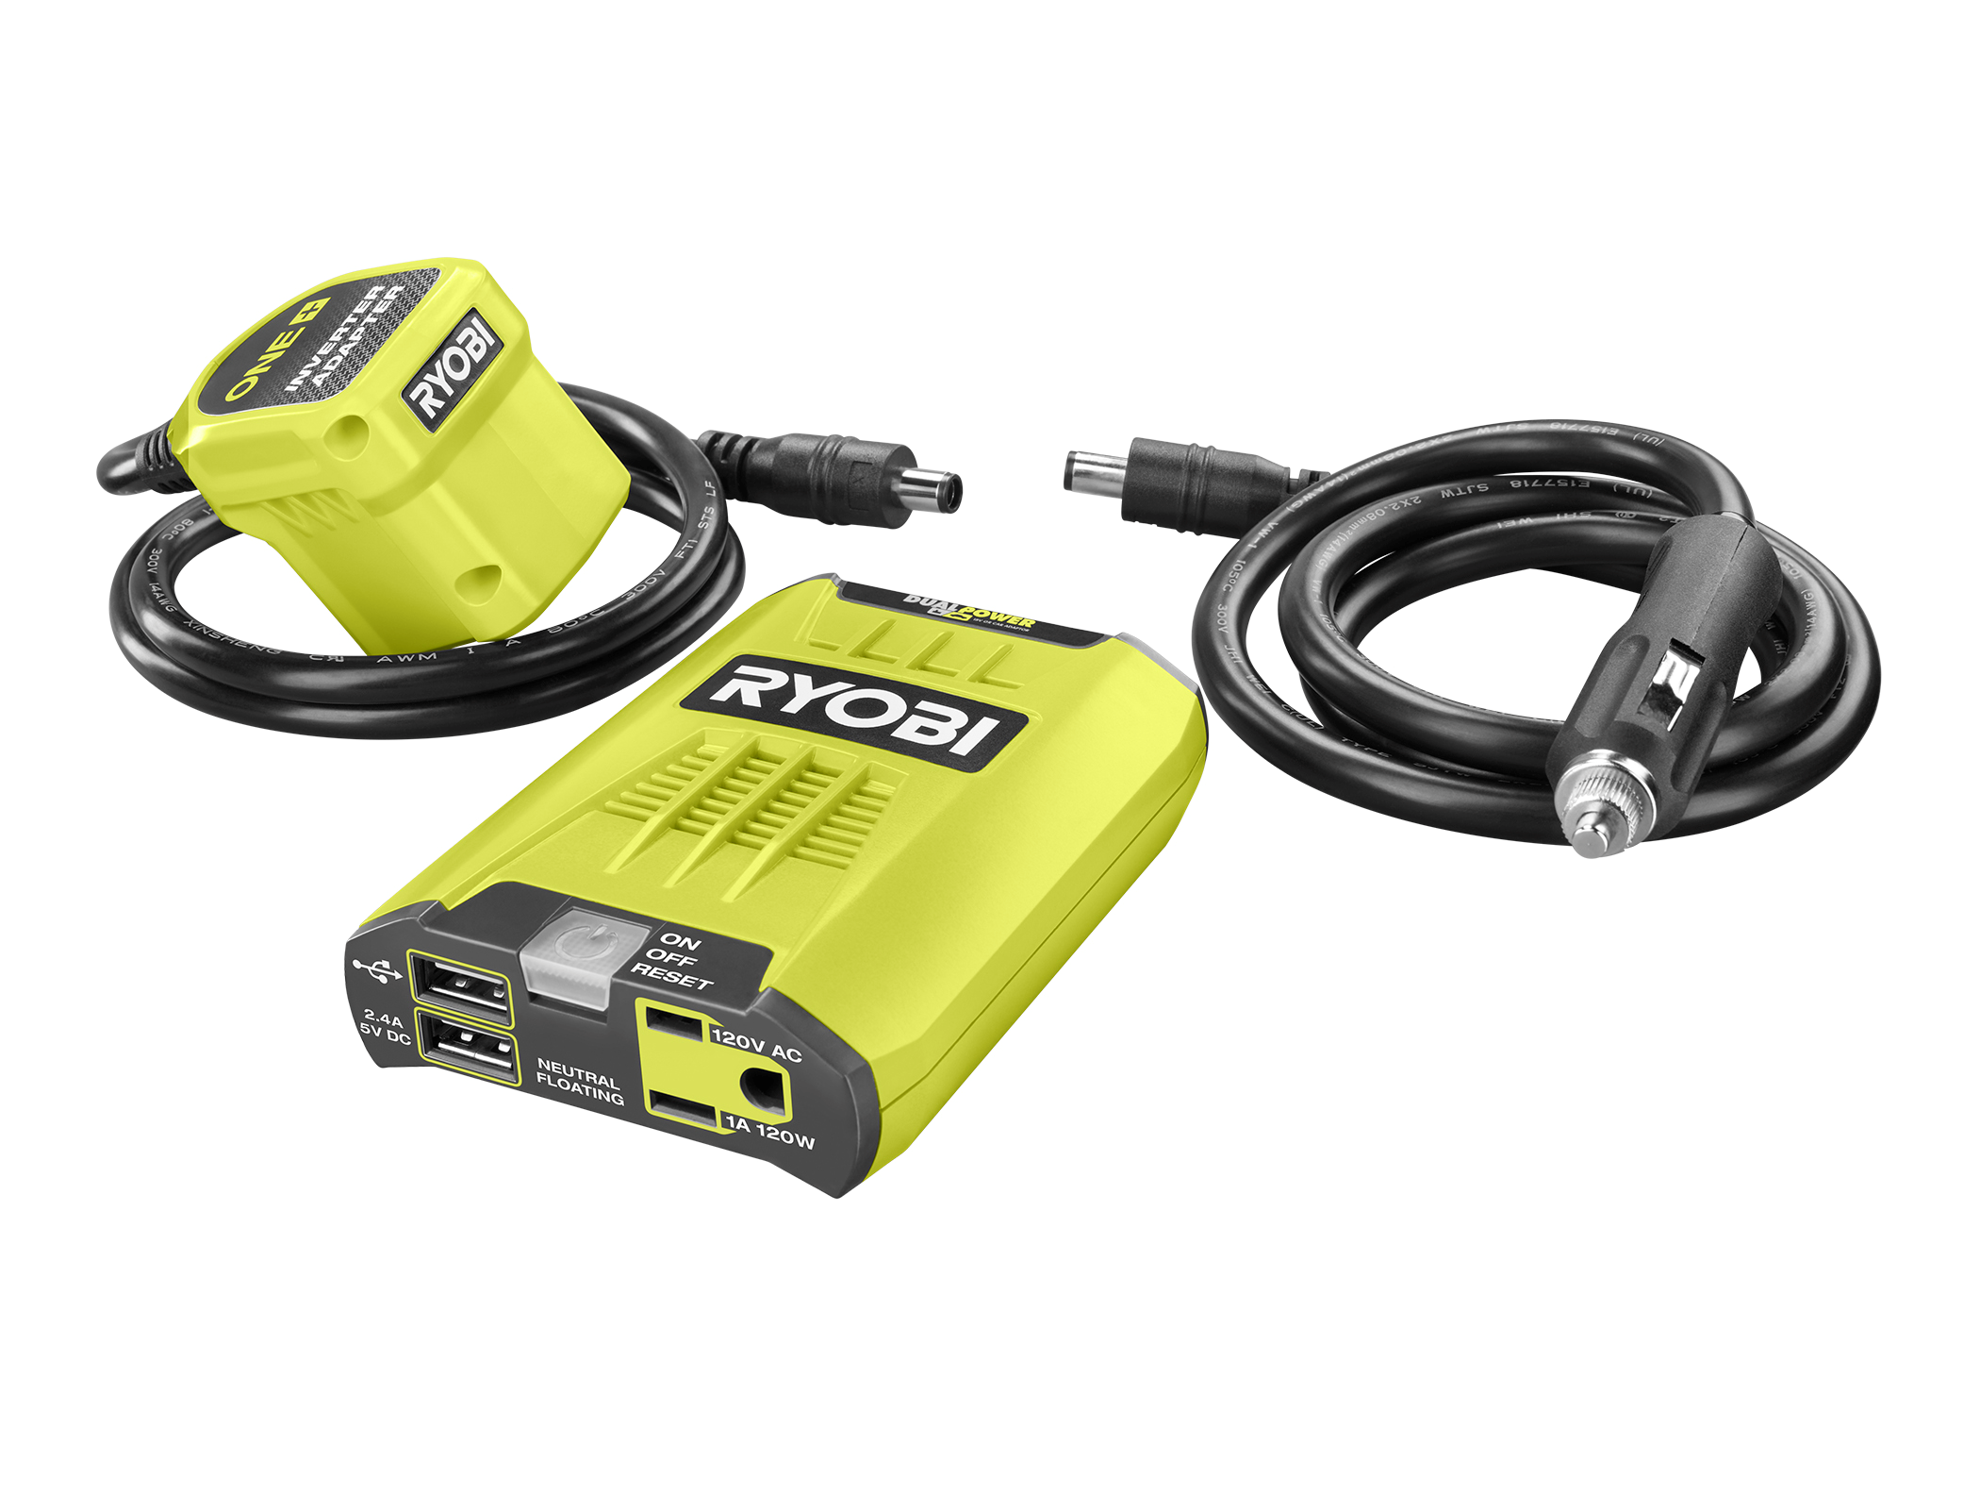 Includes Both 18V and 12V Power Adaptor Cables